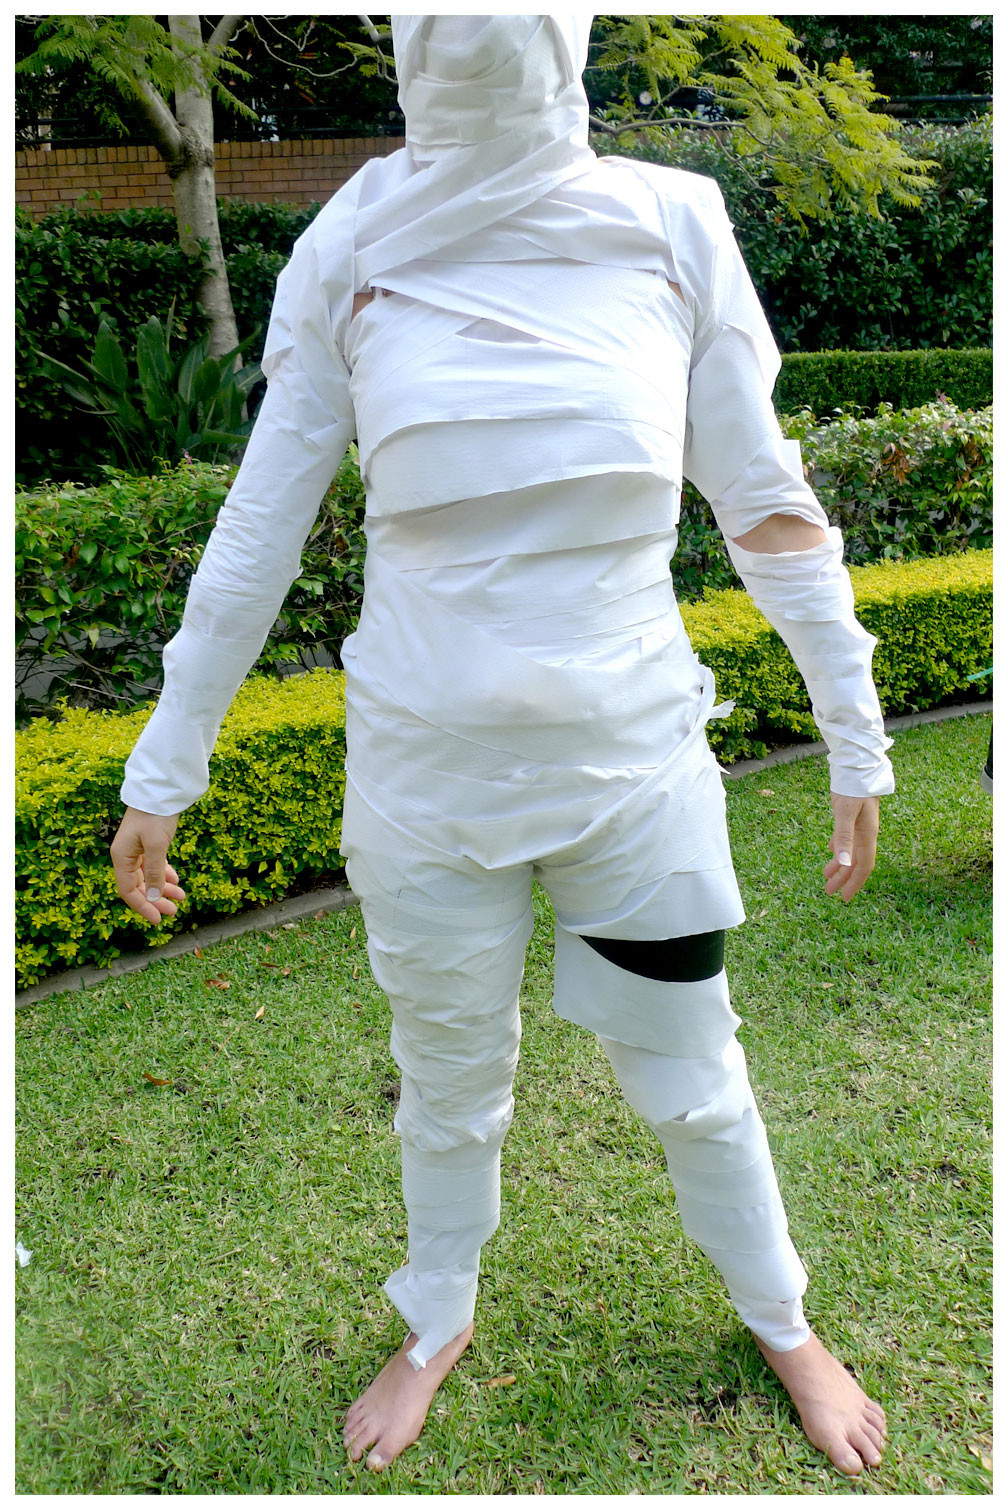 Toilet Paper Halloween Costumes
 8 Halloween Costumes That Will Have Your Friends Running